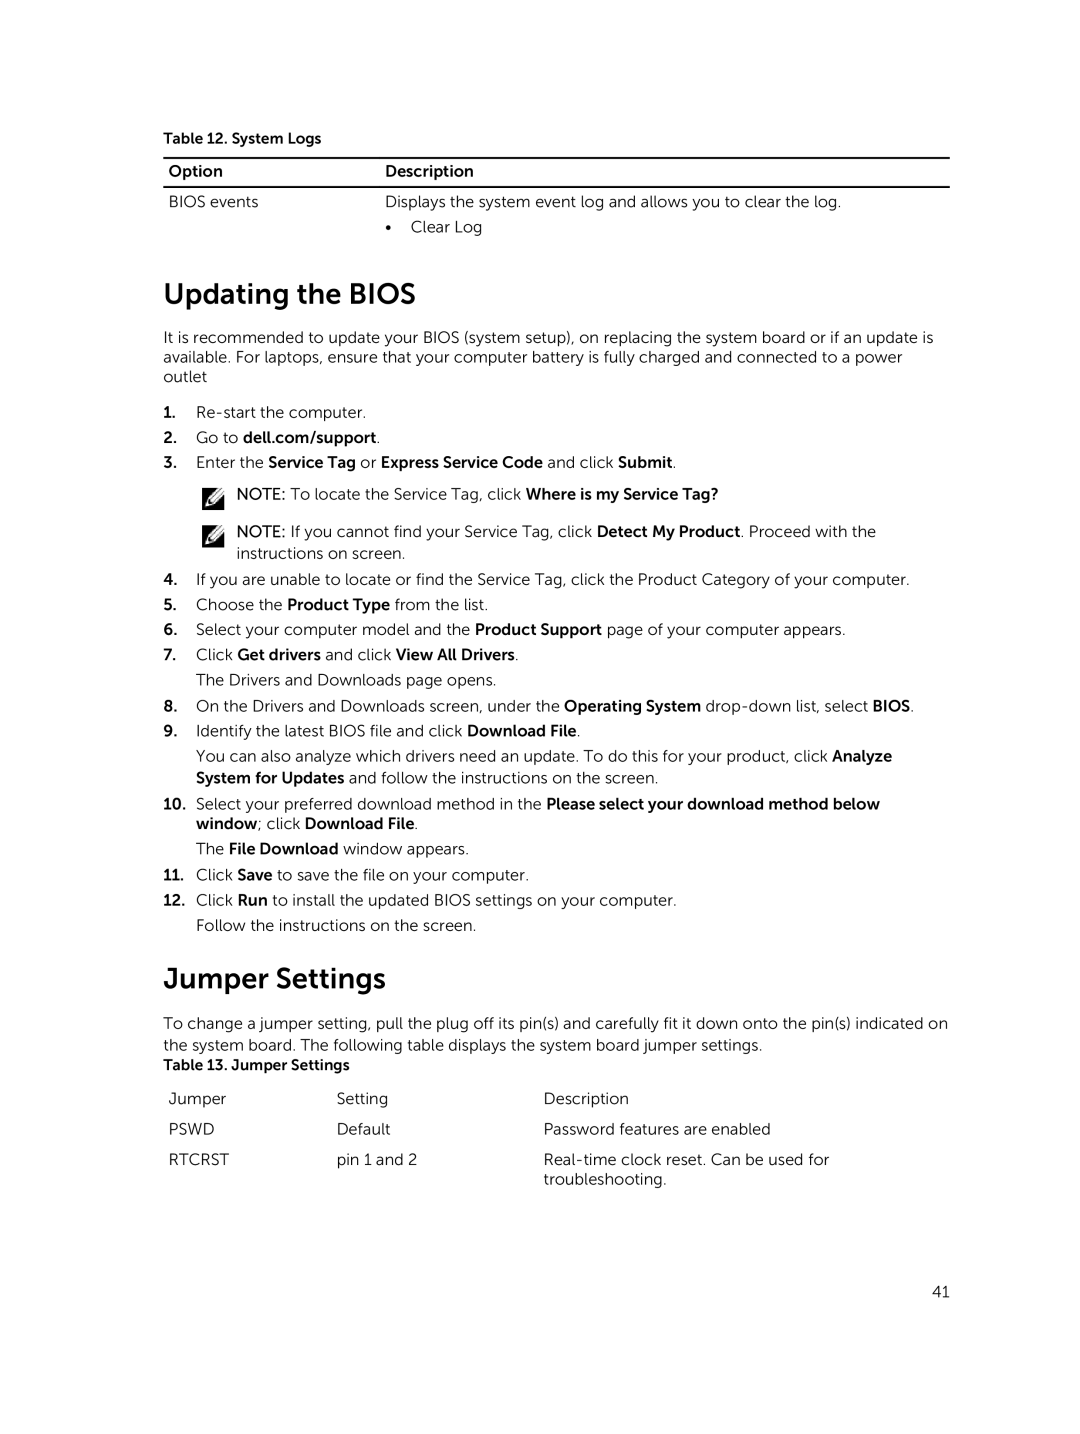 Dell 9020 owner manual Updating the Bios, Jumper Settings 